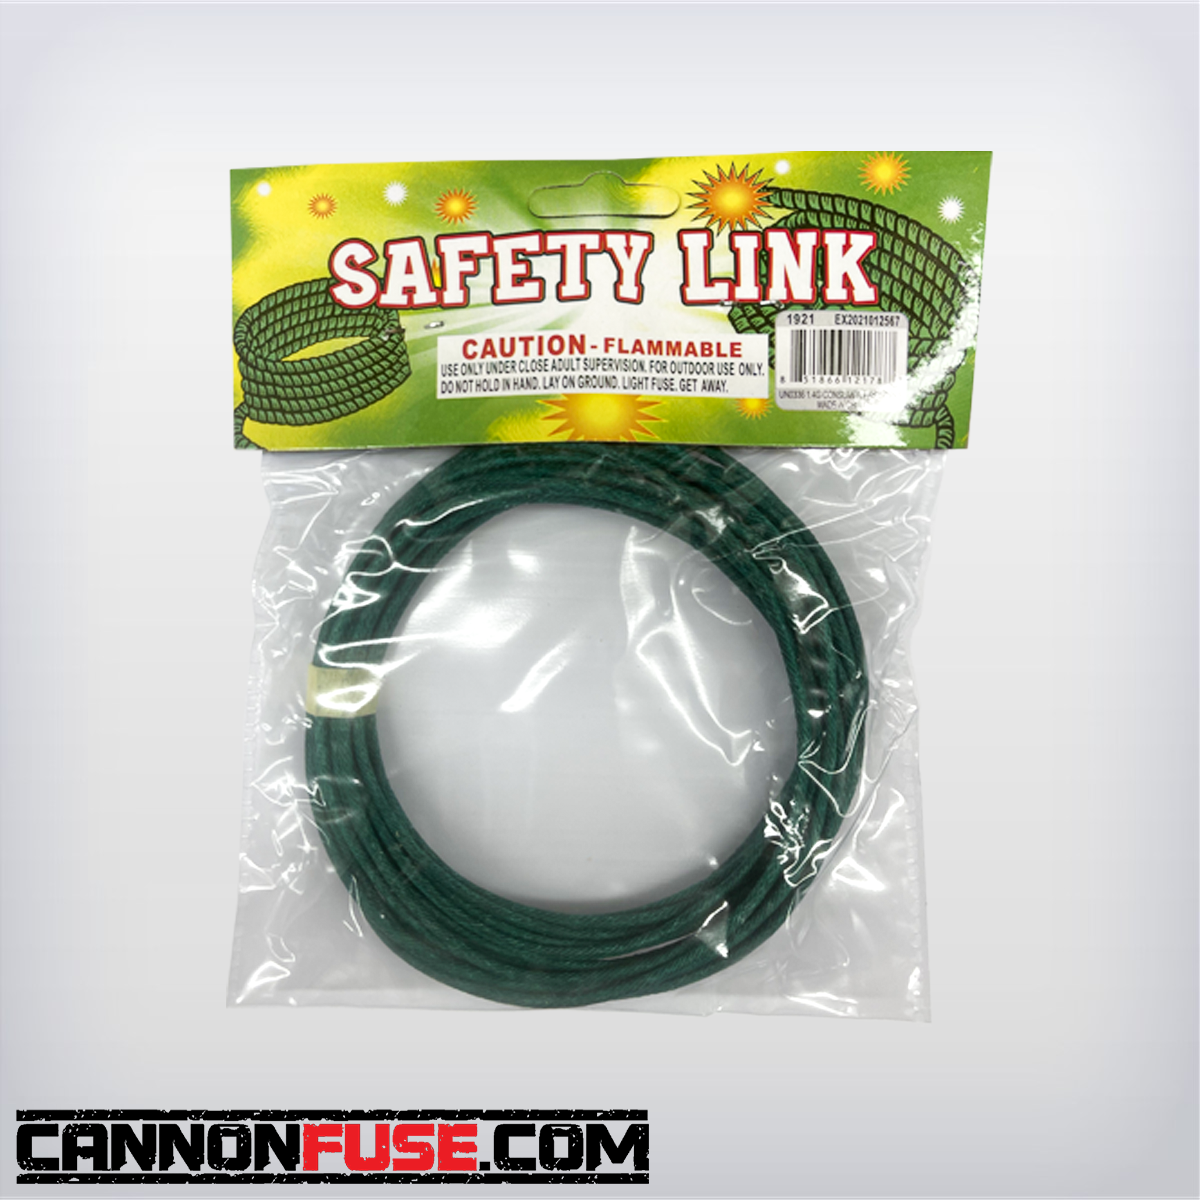 Magic Link A Green Safety Fuse (25-27 sec/ft) *New* - Twisted Thunder  Fireworks